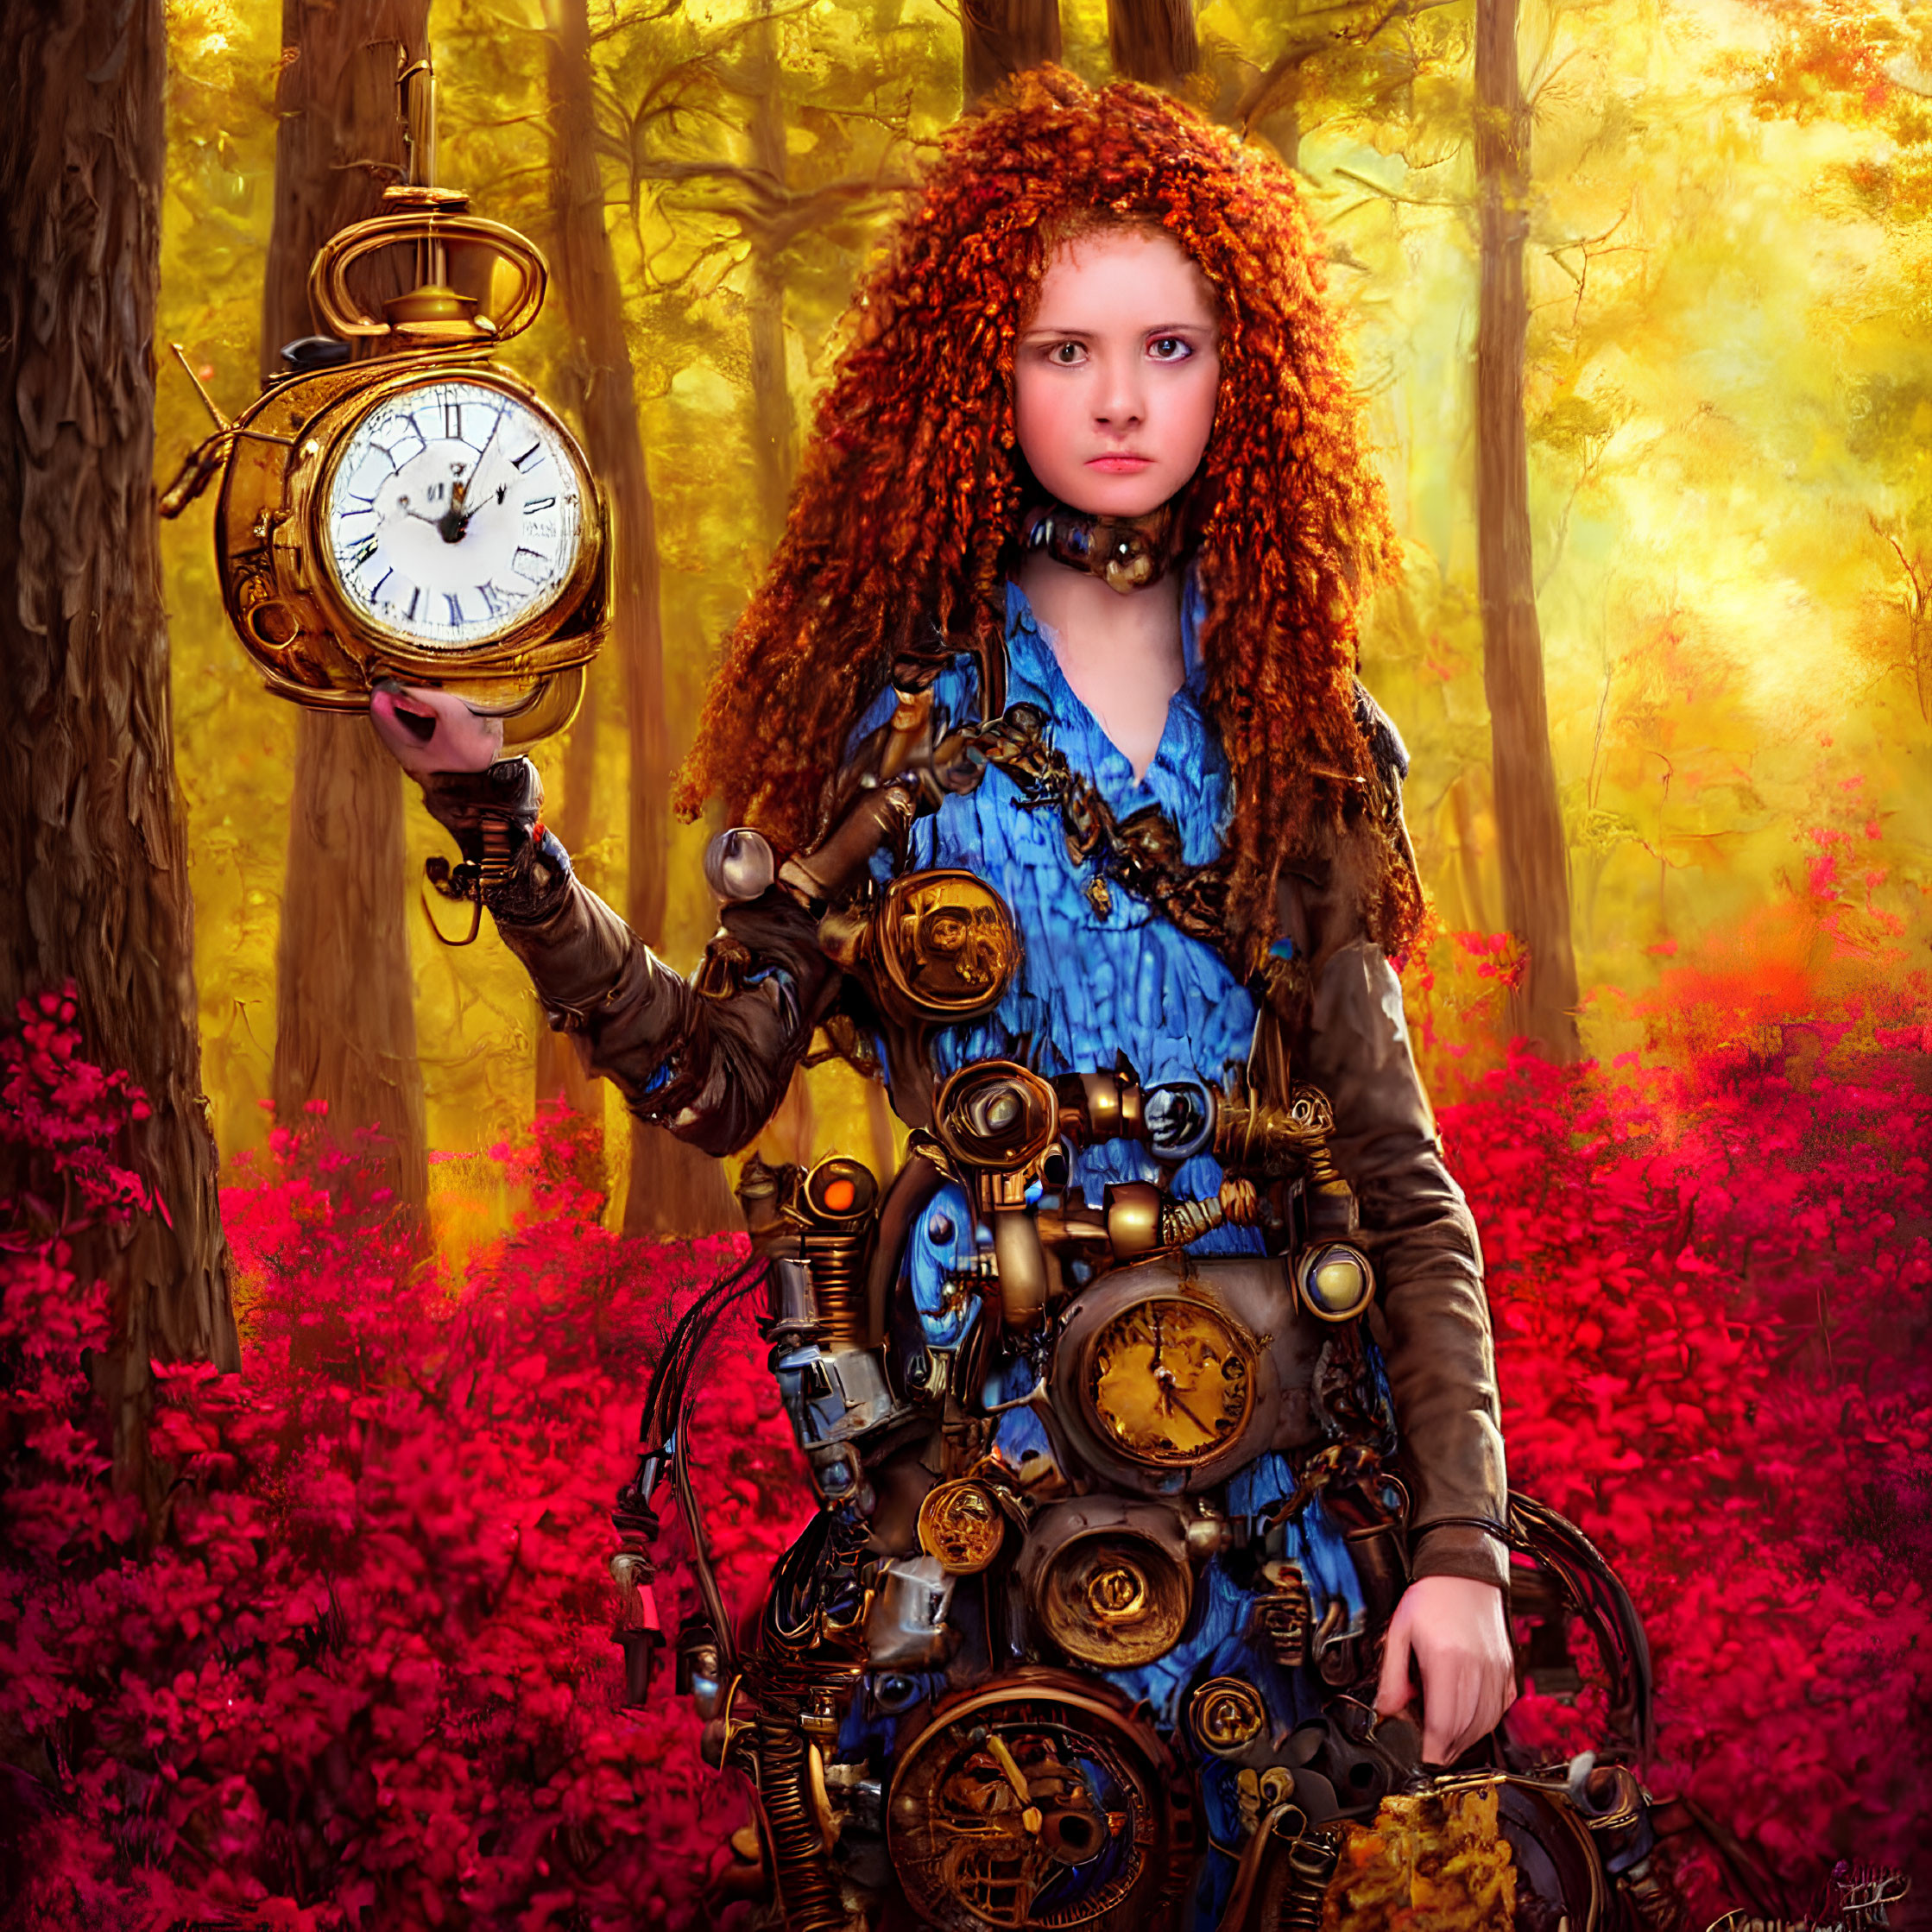 Curly Red-Haired Girl in Steampunk Outfit with Golden Pocket Watch in Autumn Forest